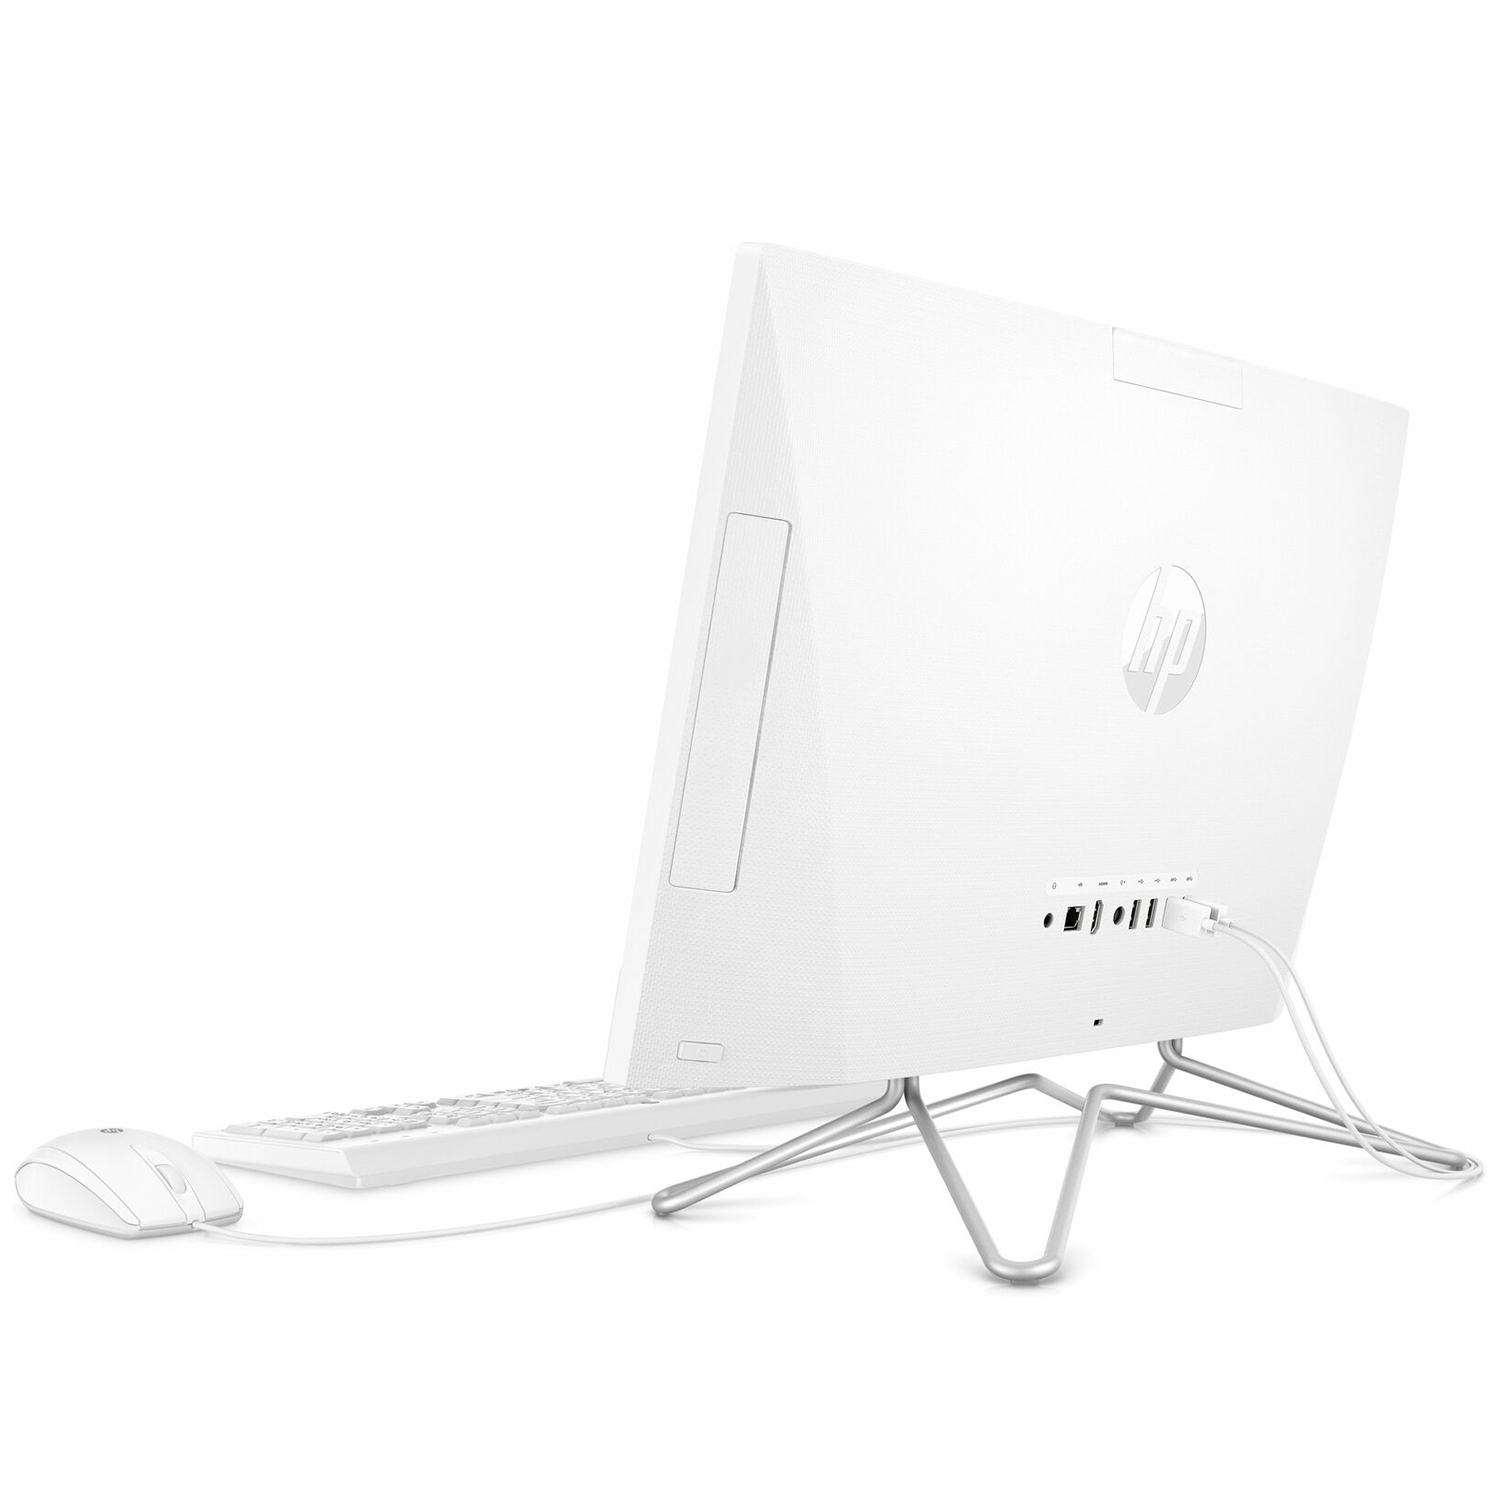 HP All-in-One Desktop, 21.5" FHD Screen, Intel Celeron J4025, 32GB RAM, 1TB SSD, Webcam, HDMI, Media Card Reader, Wi-Fi, Wired KB & Mouse, Windows 11 Home - image 5 of 5